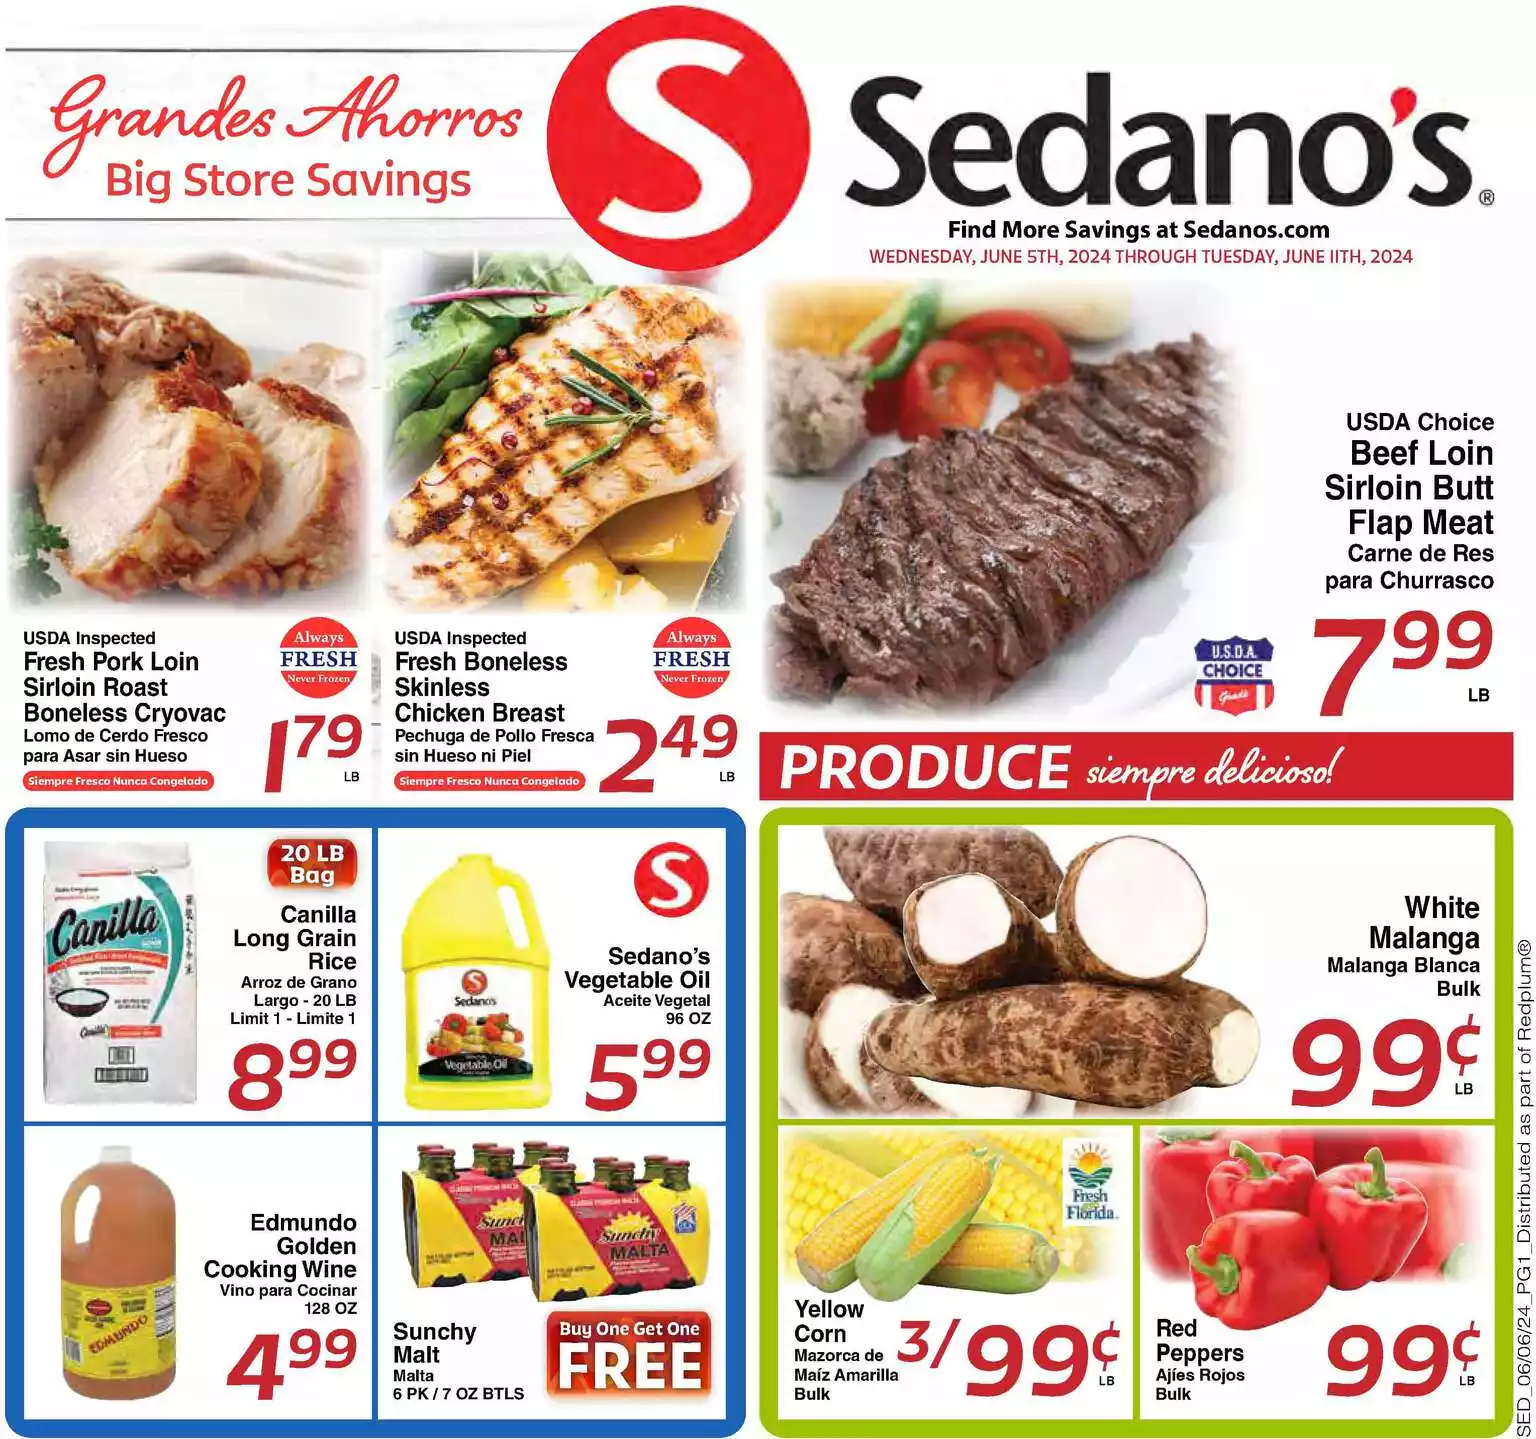 Sedano's July 2024 Weekly Sales, Deals, Discounts and Digital Coupons.